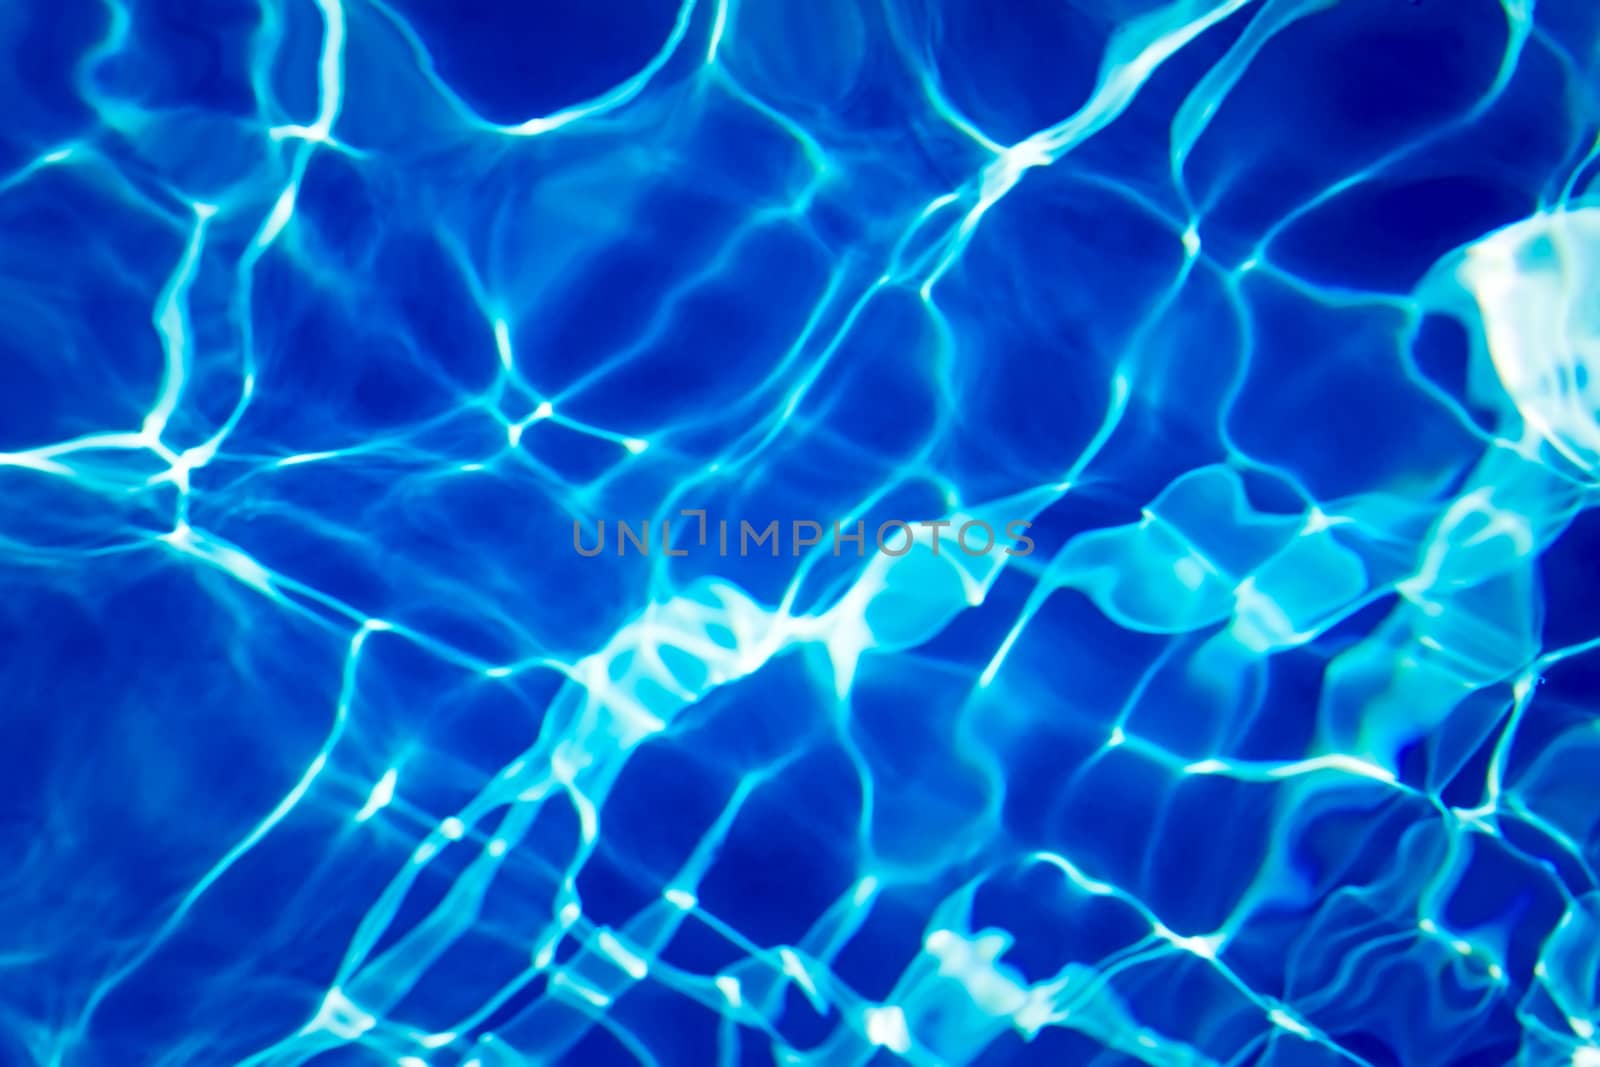 Fragment have been added at the bottom of the pool with water by georgina198